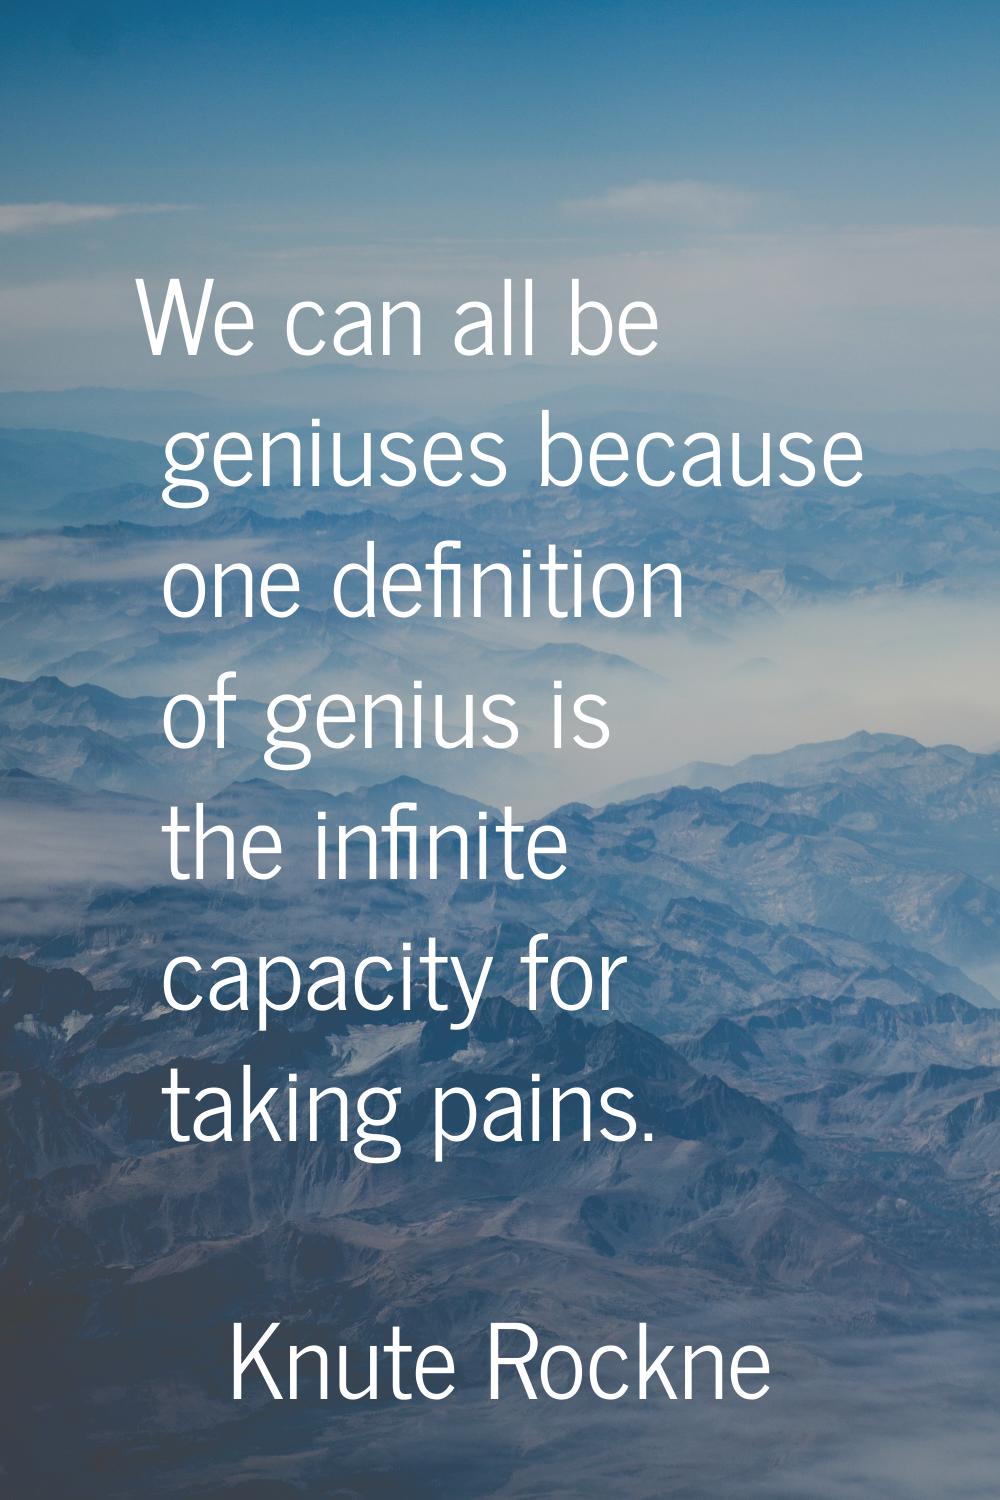 We can all be geniuses because one definition of genius is the infinite capacity for taking pains.